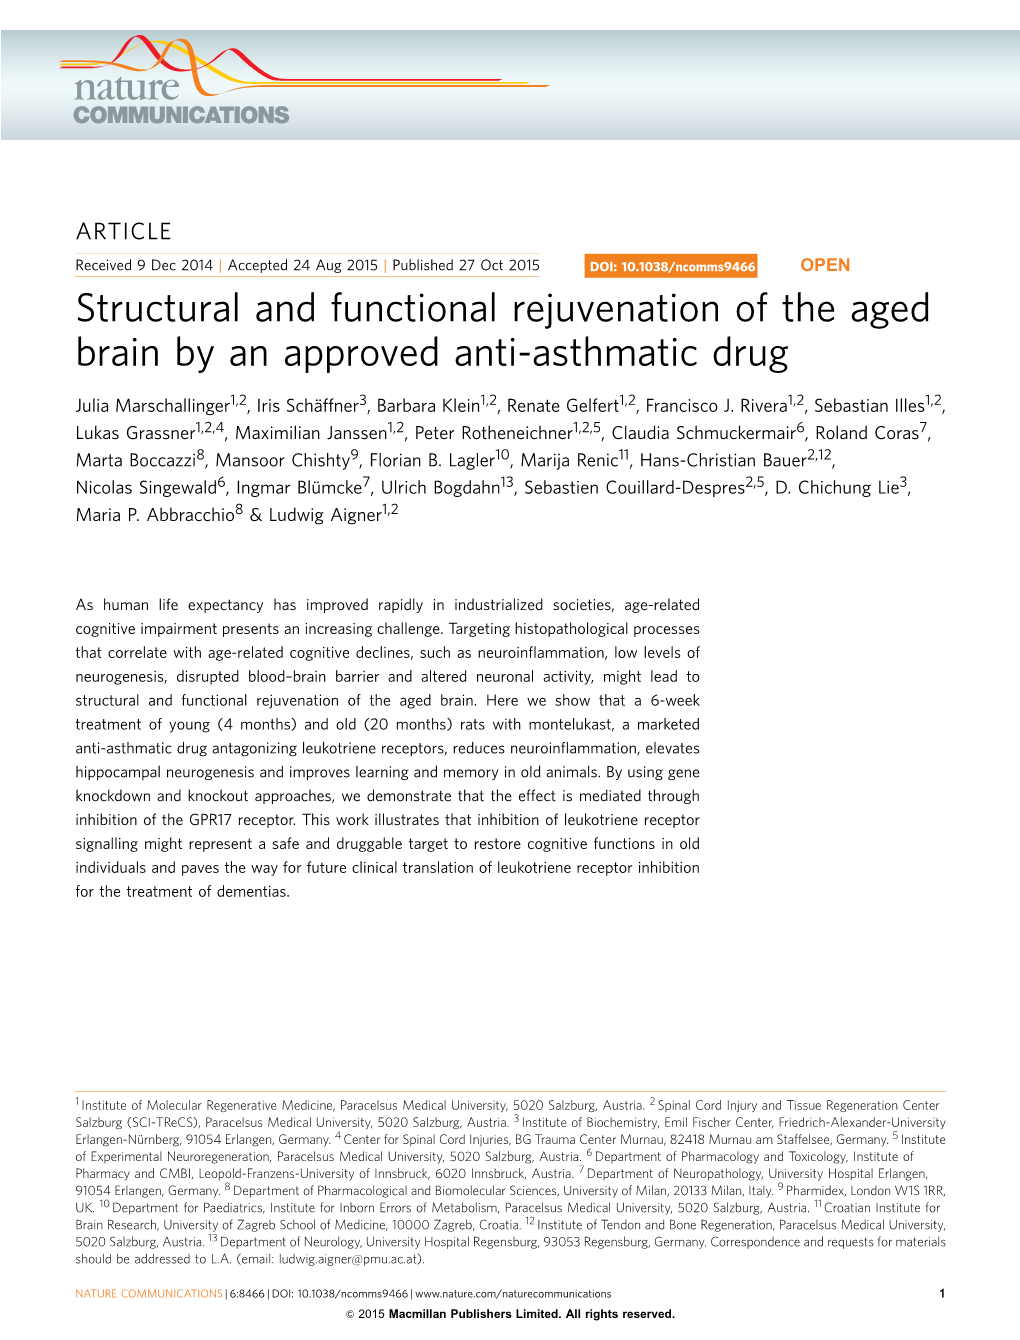 Structural and Functional Rejuvenation of the Aged Brain by an Approved Anti-Asthmatic Drug